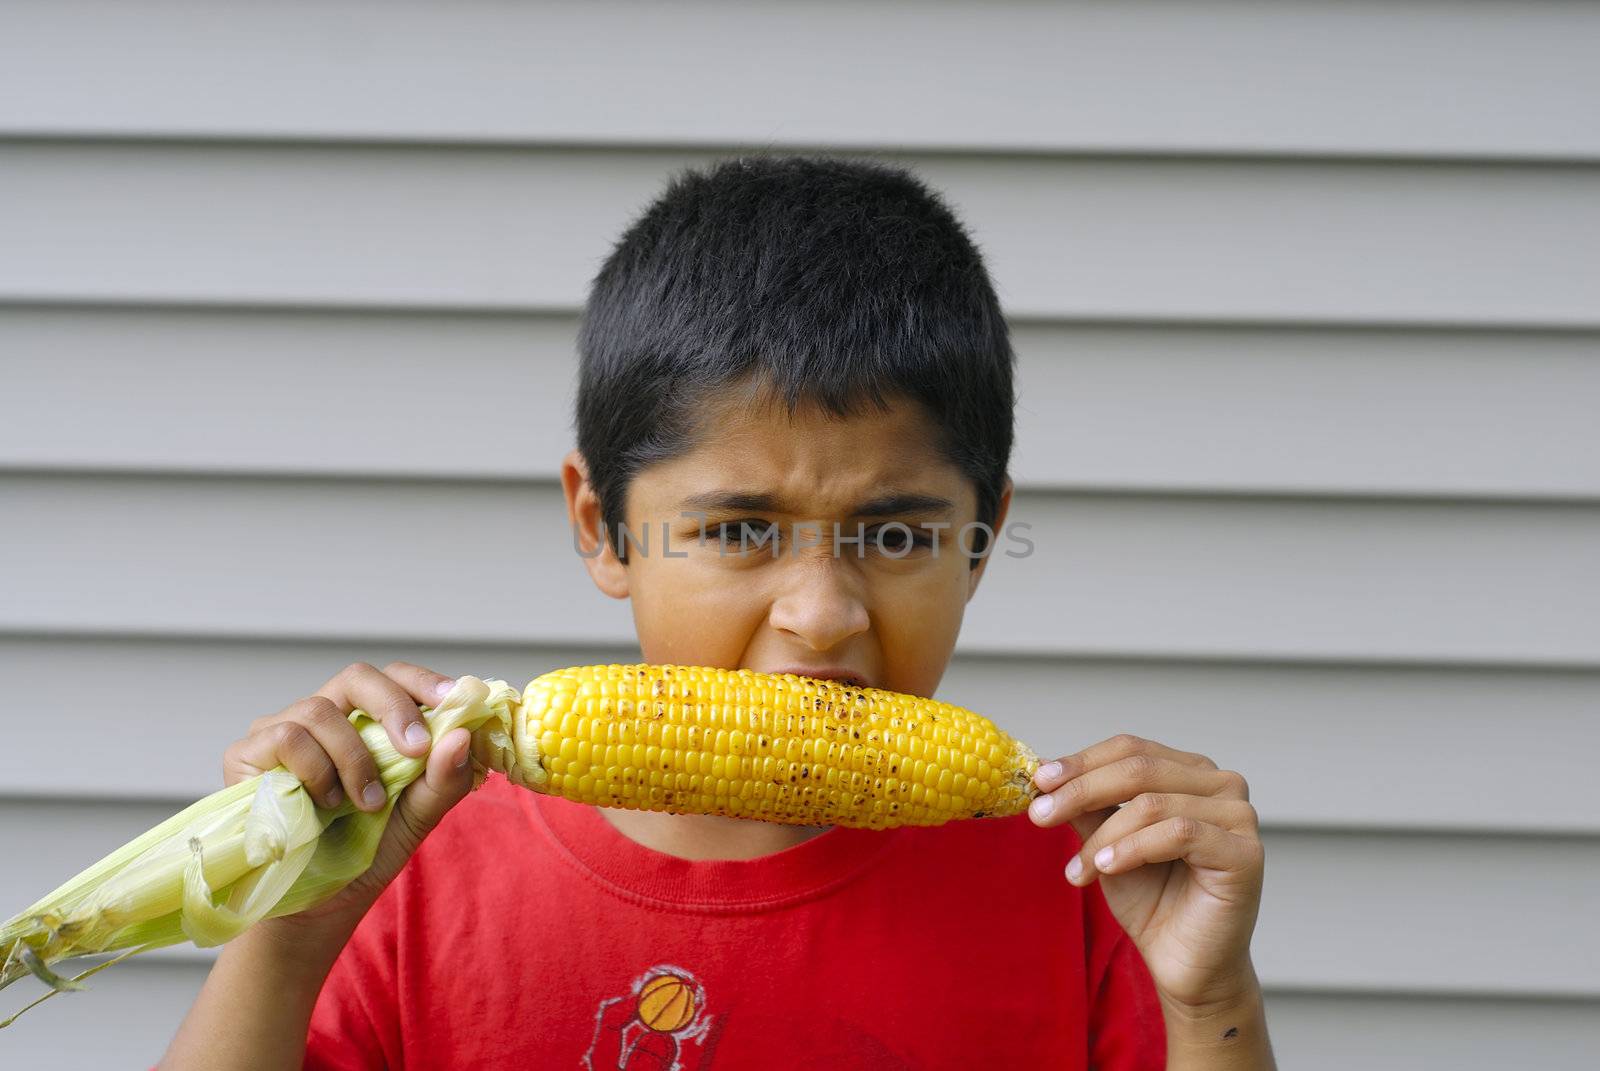 An handsome Indian kid eating corn during thanksgiving